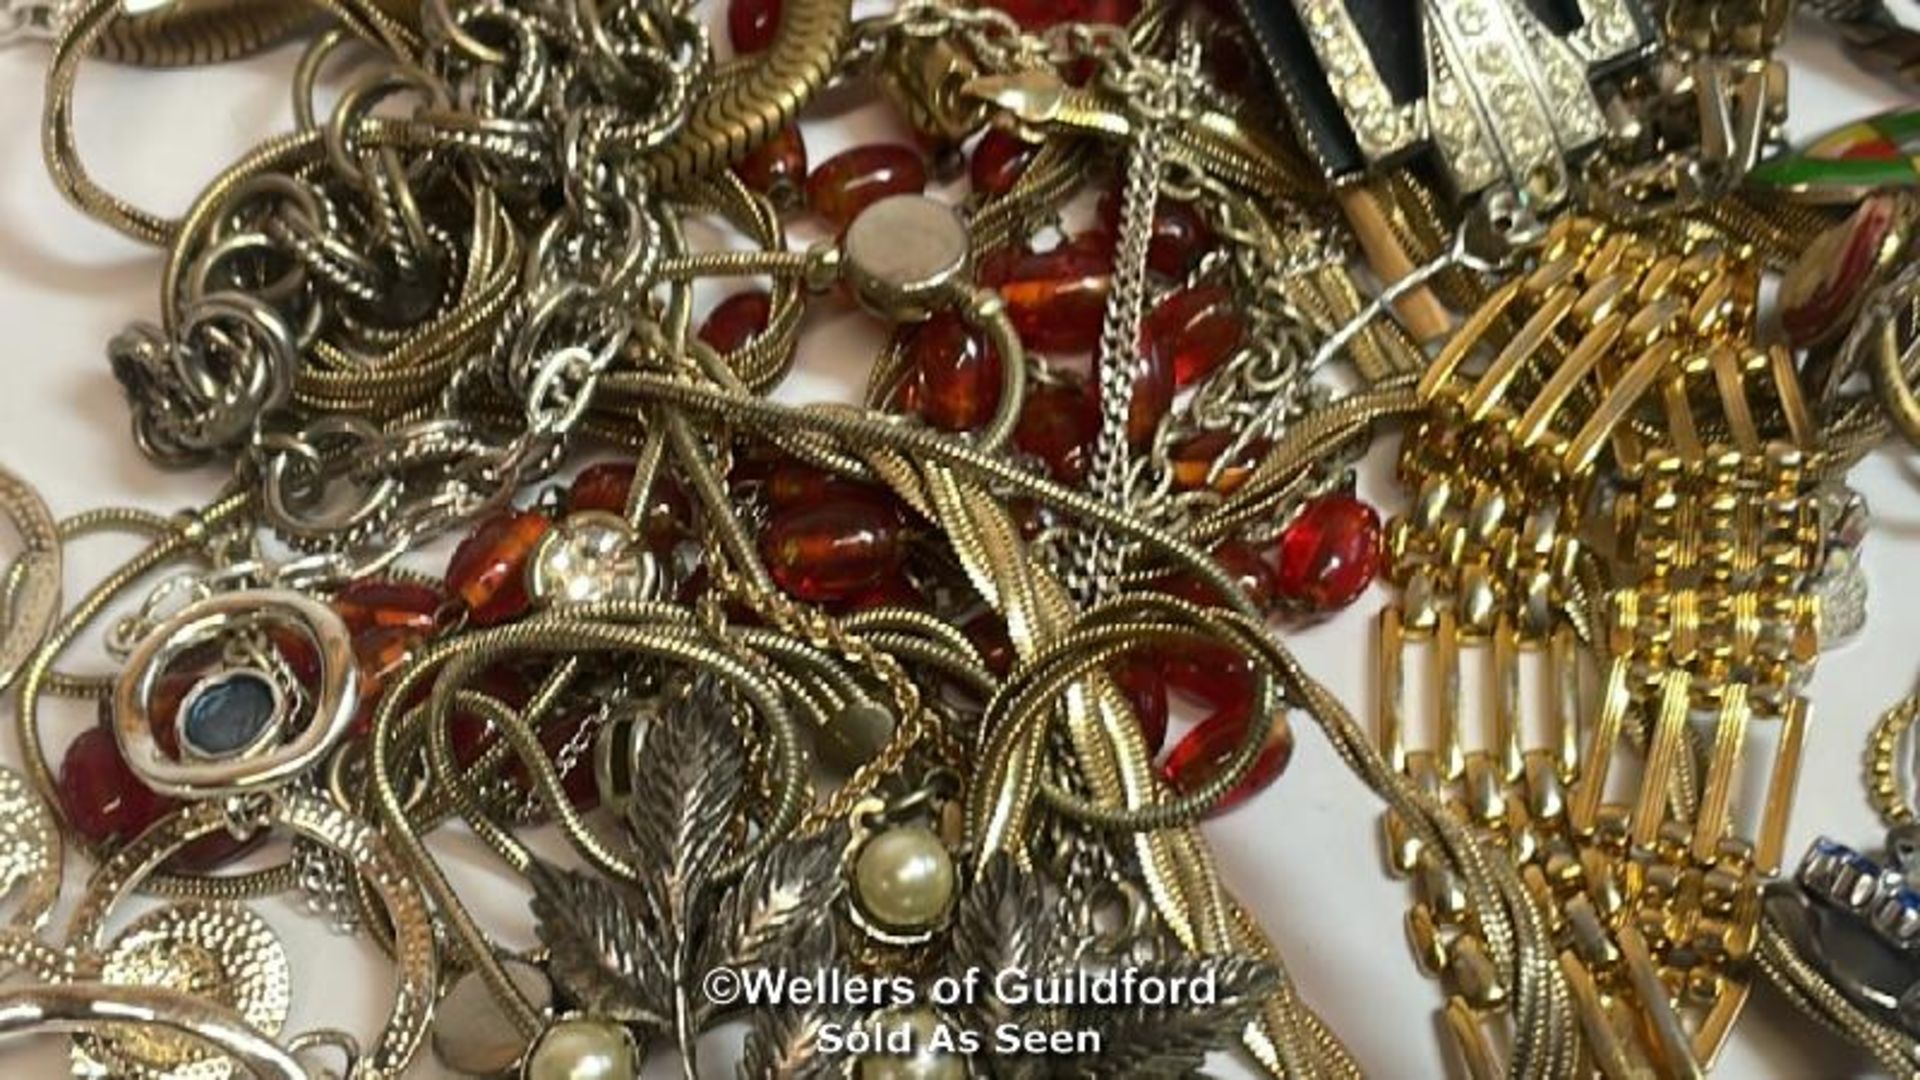 Assorted costume jewellery including brooches, necklaces, bangles and cufflinks - Image 4 of 10